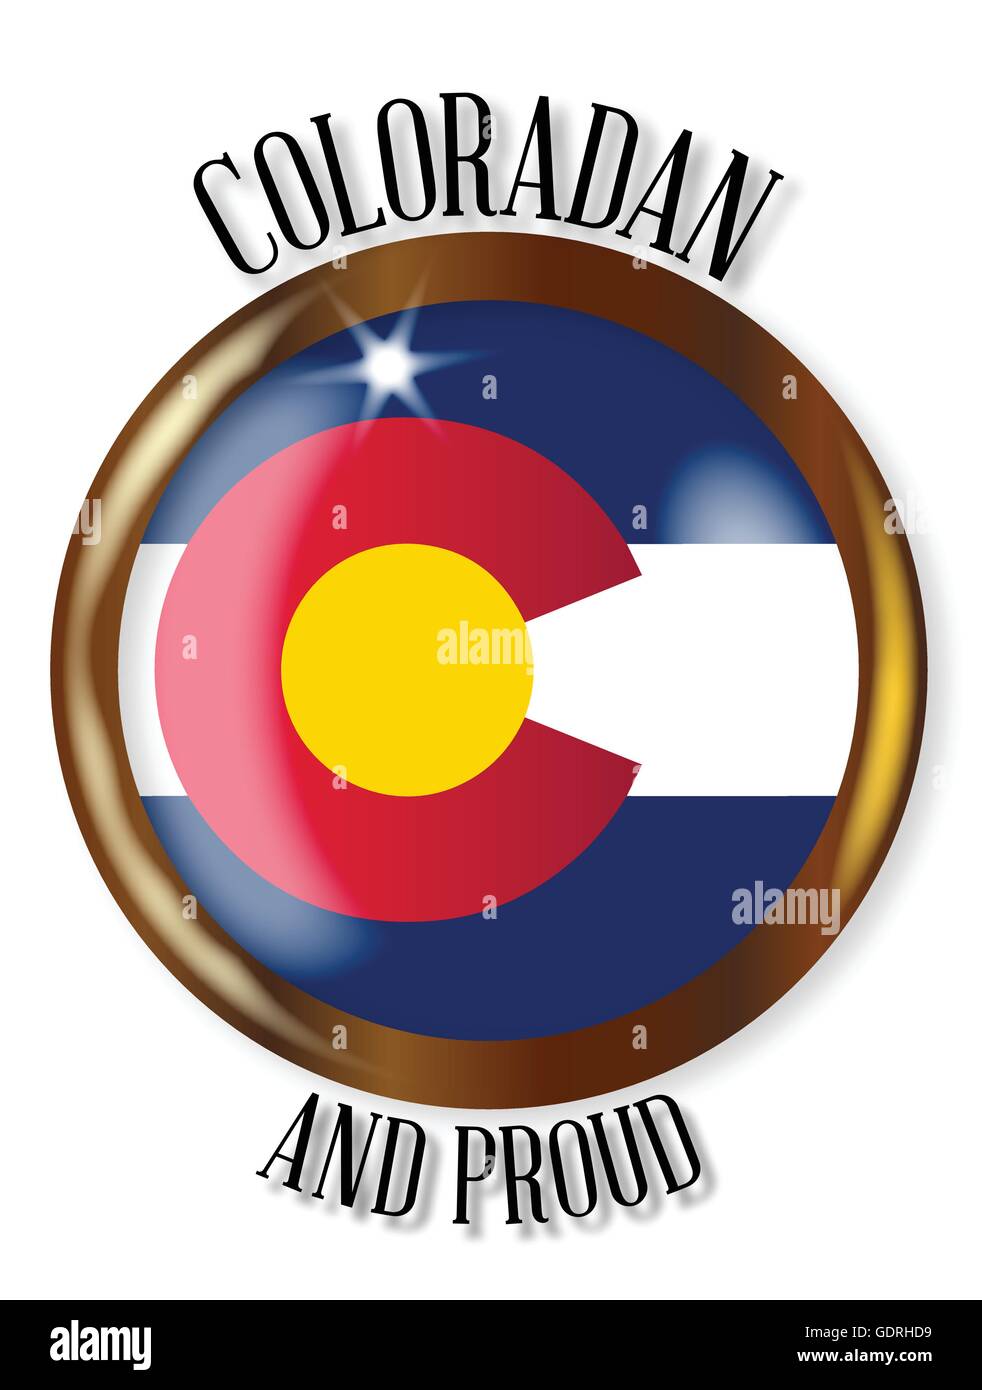 Colorado state flag button with a gold metal circular border over a white background with the text Coloradan and Proud Stock Vector